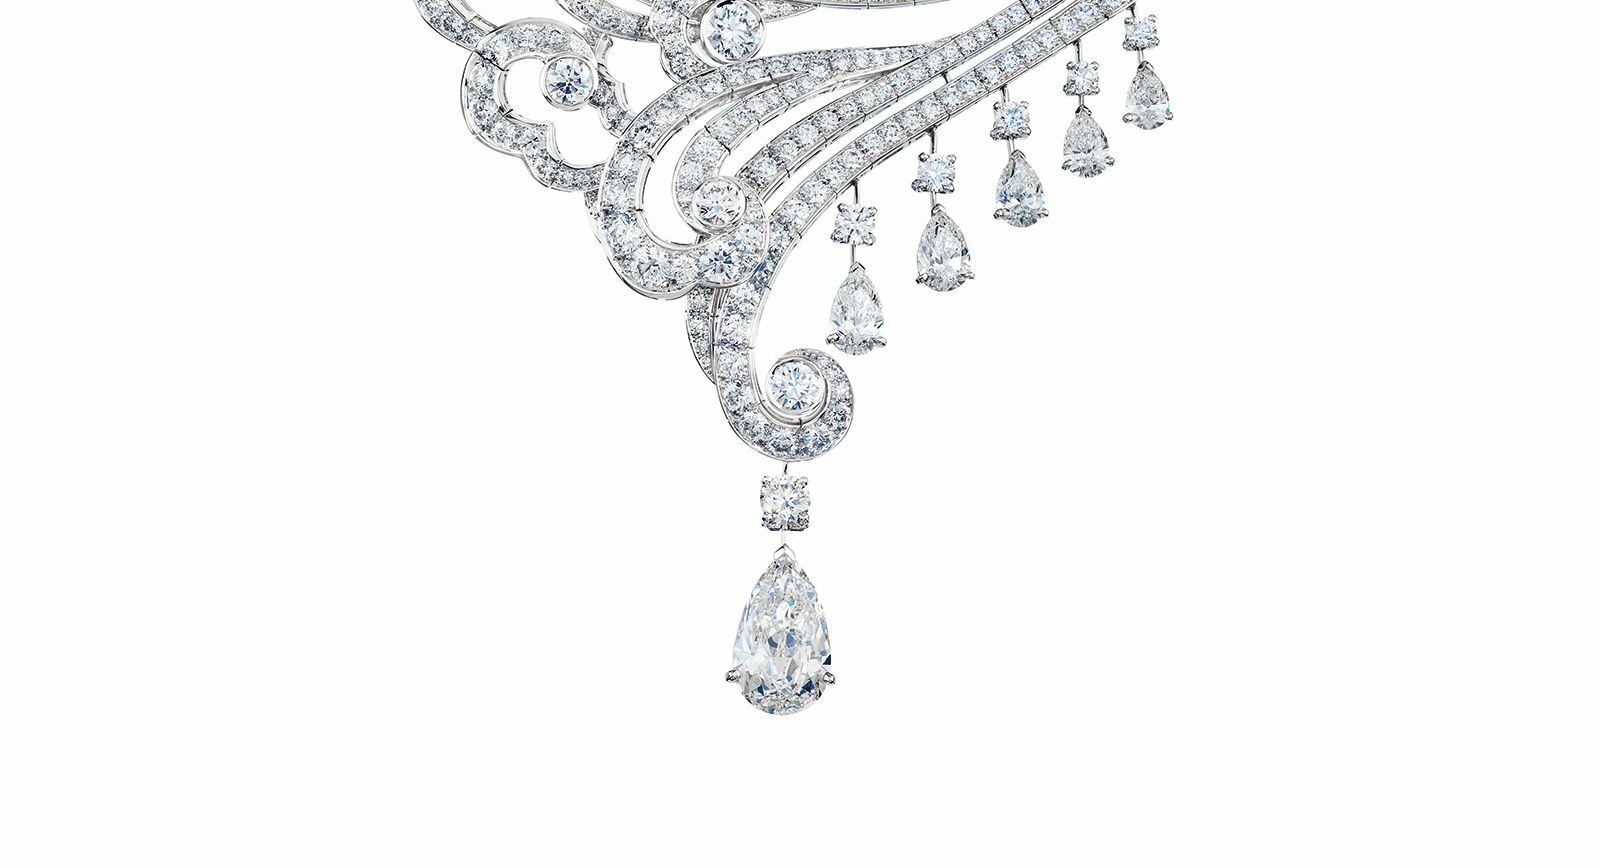 The Sirocco Necklace From De Beers – A Gust Of Wind And Diamond Sparkle